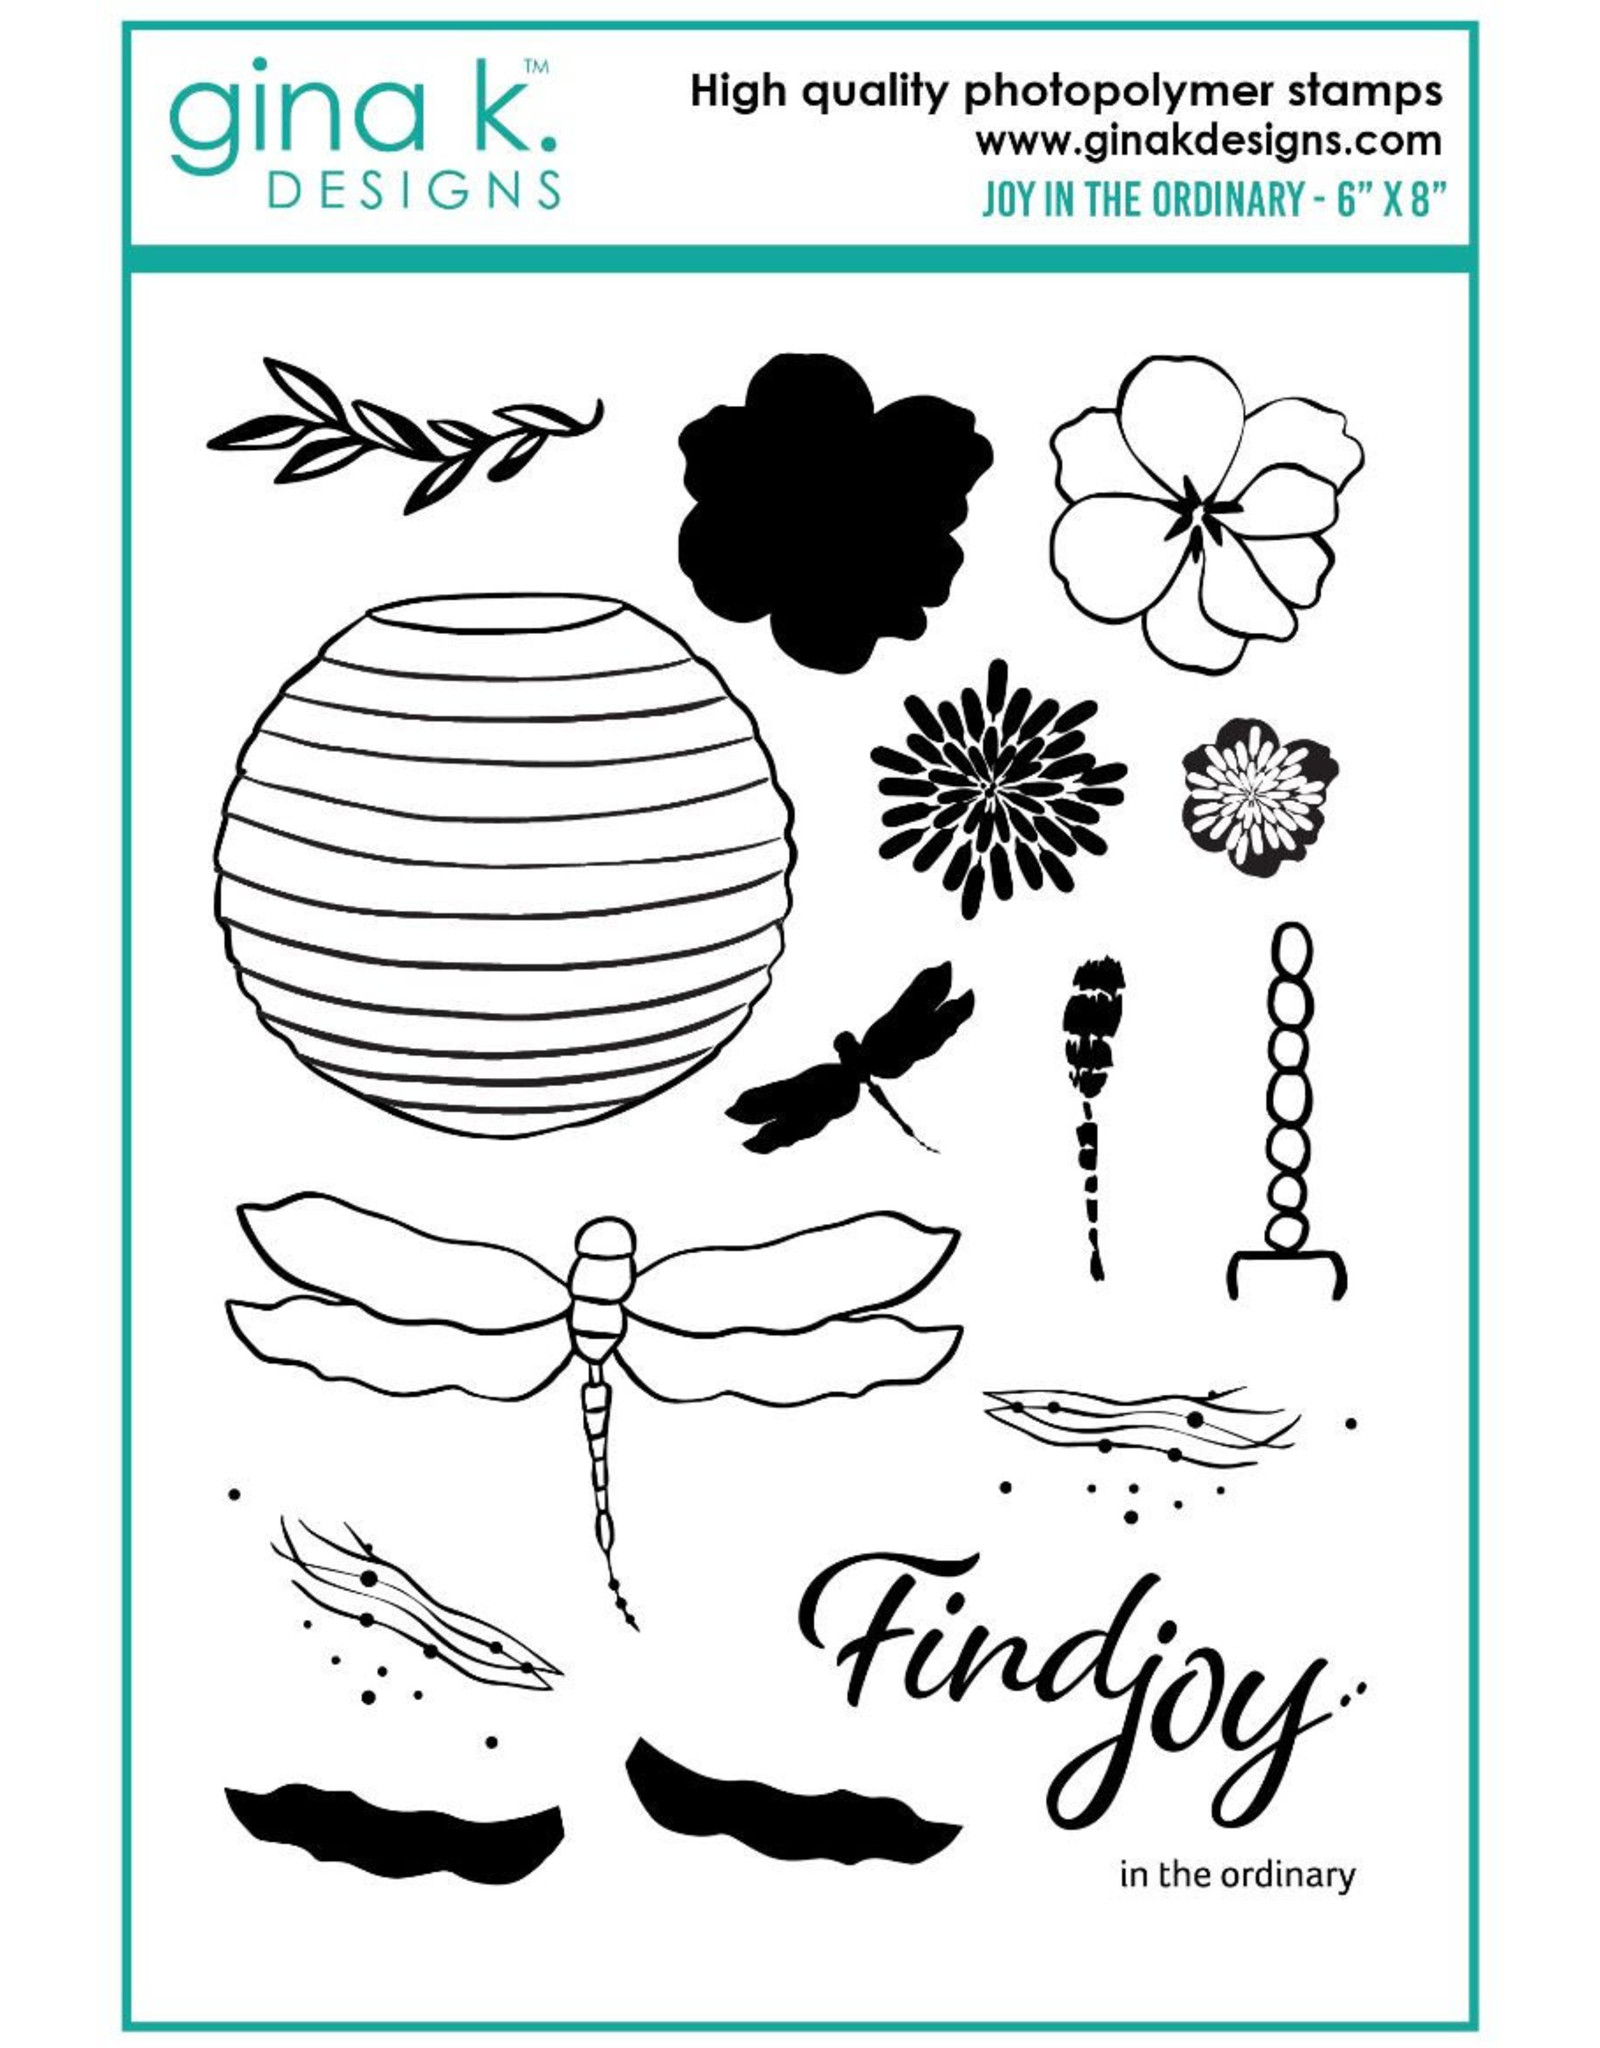 Gina K. Designs Joy in the Ordinary Stamps